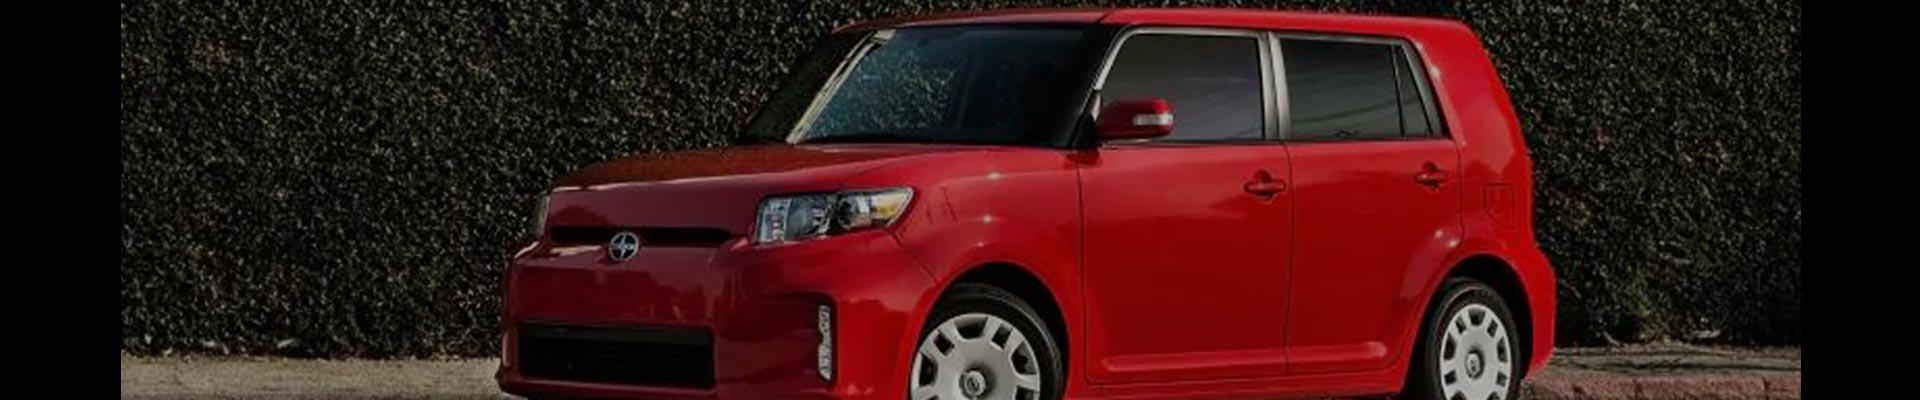 Shop Replacement and OEM 2006 Scion xB Parts with Discounted Price on the Net